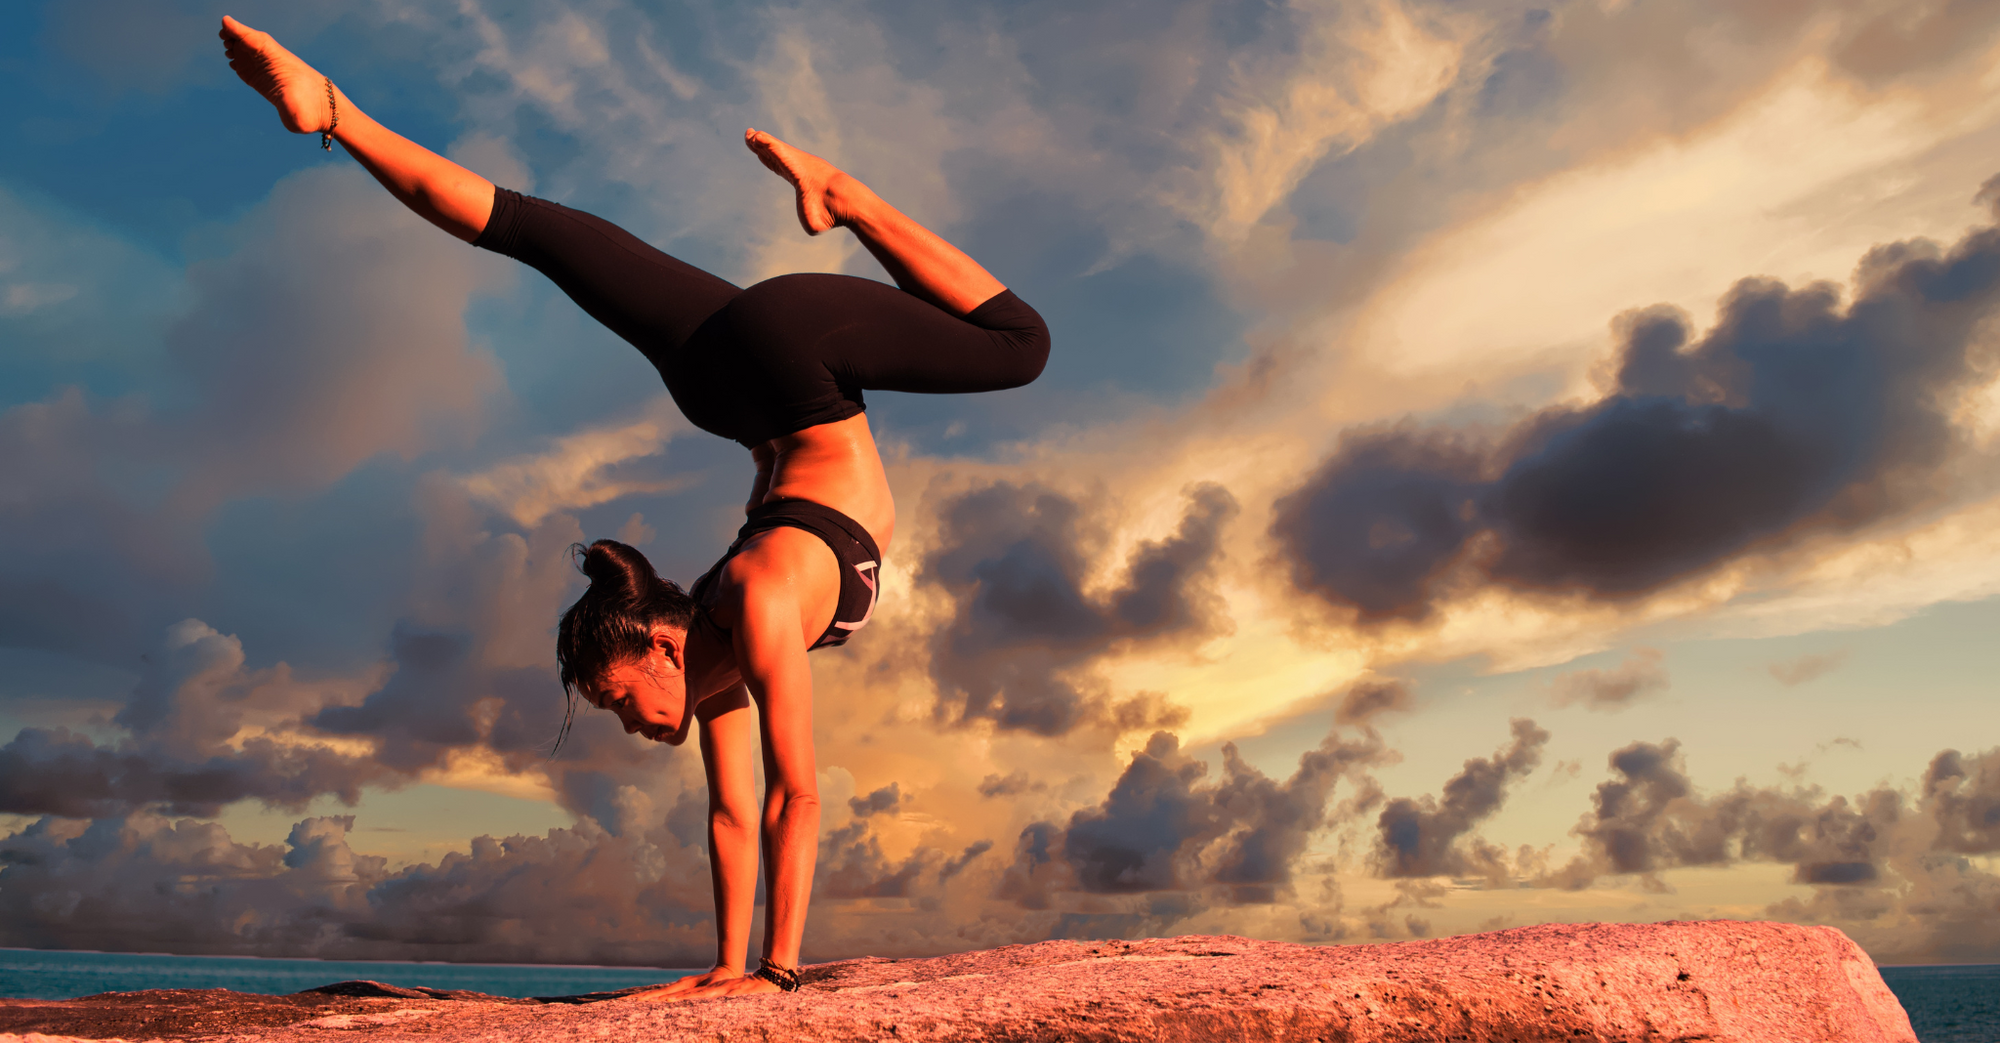 Vinyasa Yoga Flow Poses to Increase Flexibility, Strength, And Mindfulness